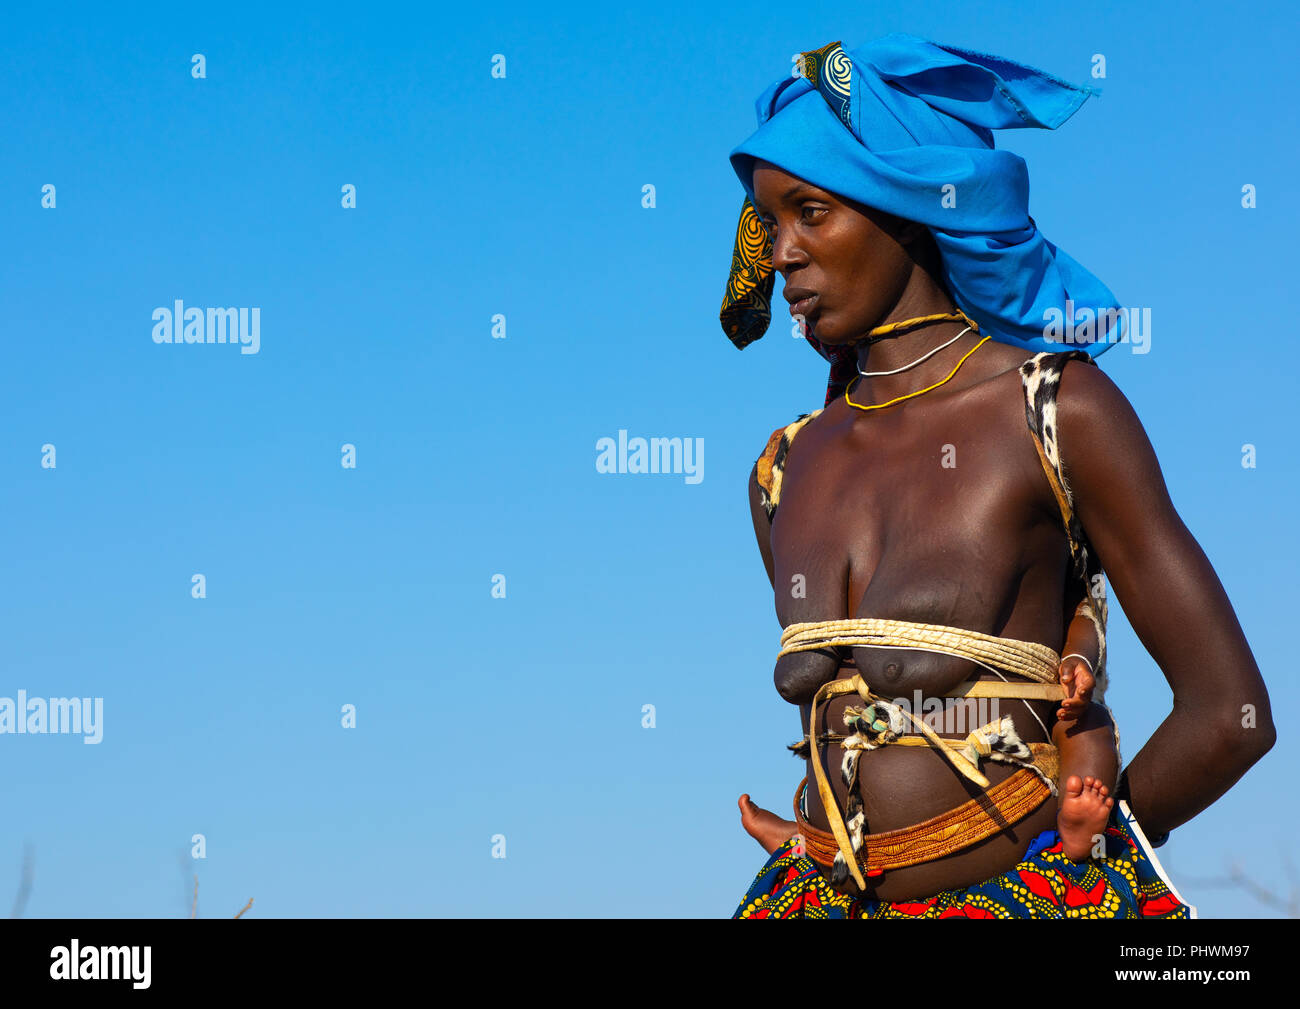 https://c8.alamy.com/comp/PHWM97/mucubal-tribe-woman-with-the-traditional-bra-made-with-rope-namibe-province-virei-angola-PHWM97.jpg